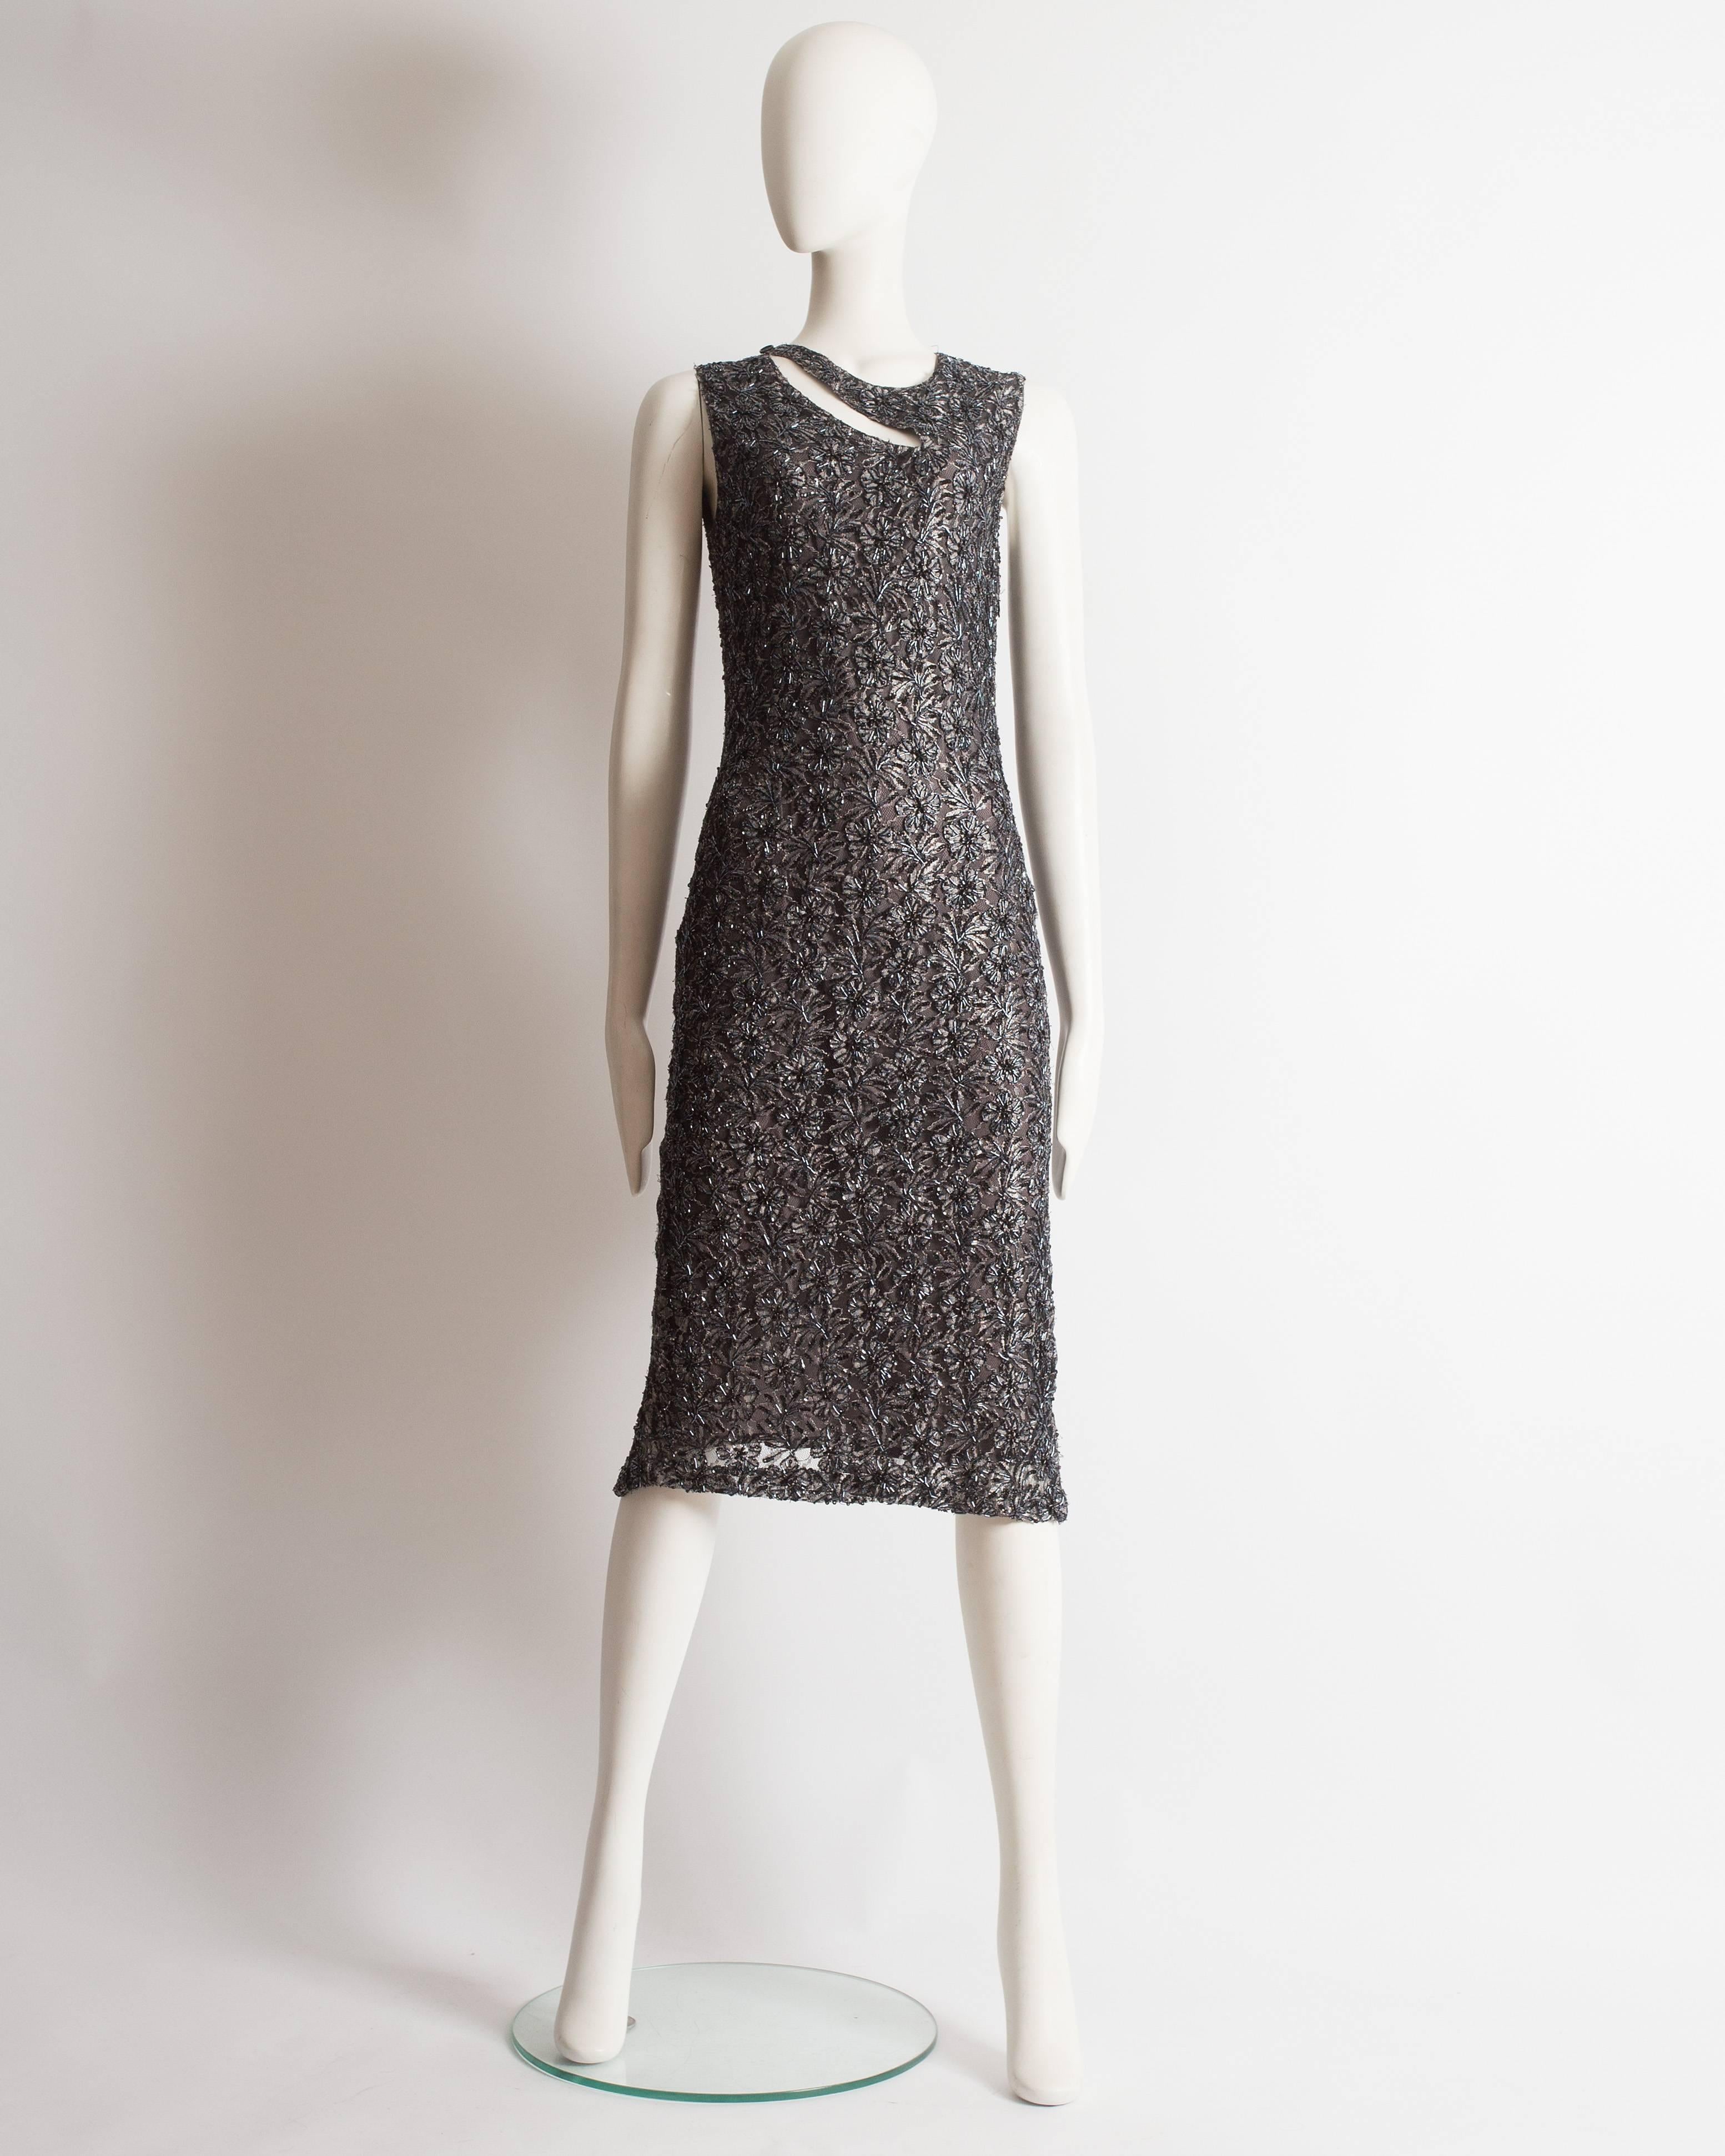 Presenting an enchanting Alexander McQueen sleeveless evening dress, a true masterpiece of elegance and artistry. This dress is constructed from steel grey lace, beautifully adorned with bugle beads and sequins, adding a touch of opulence and